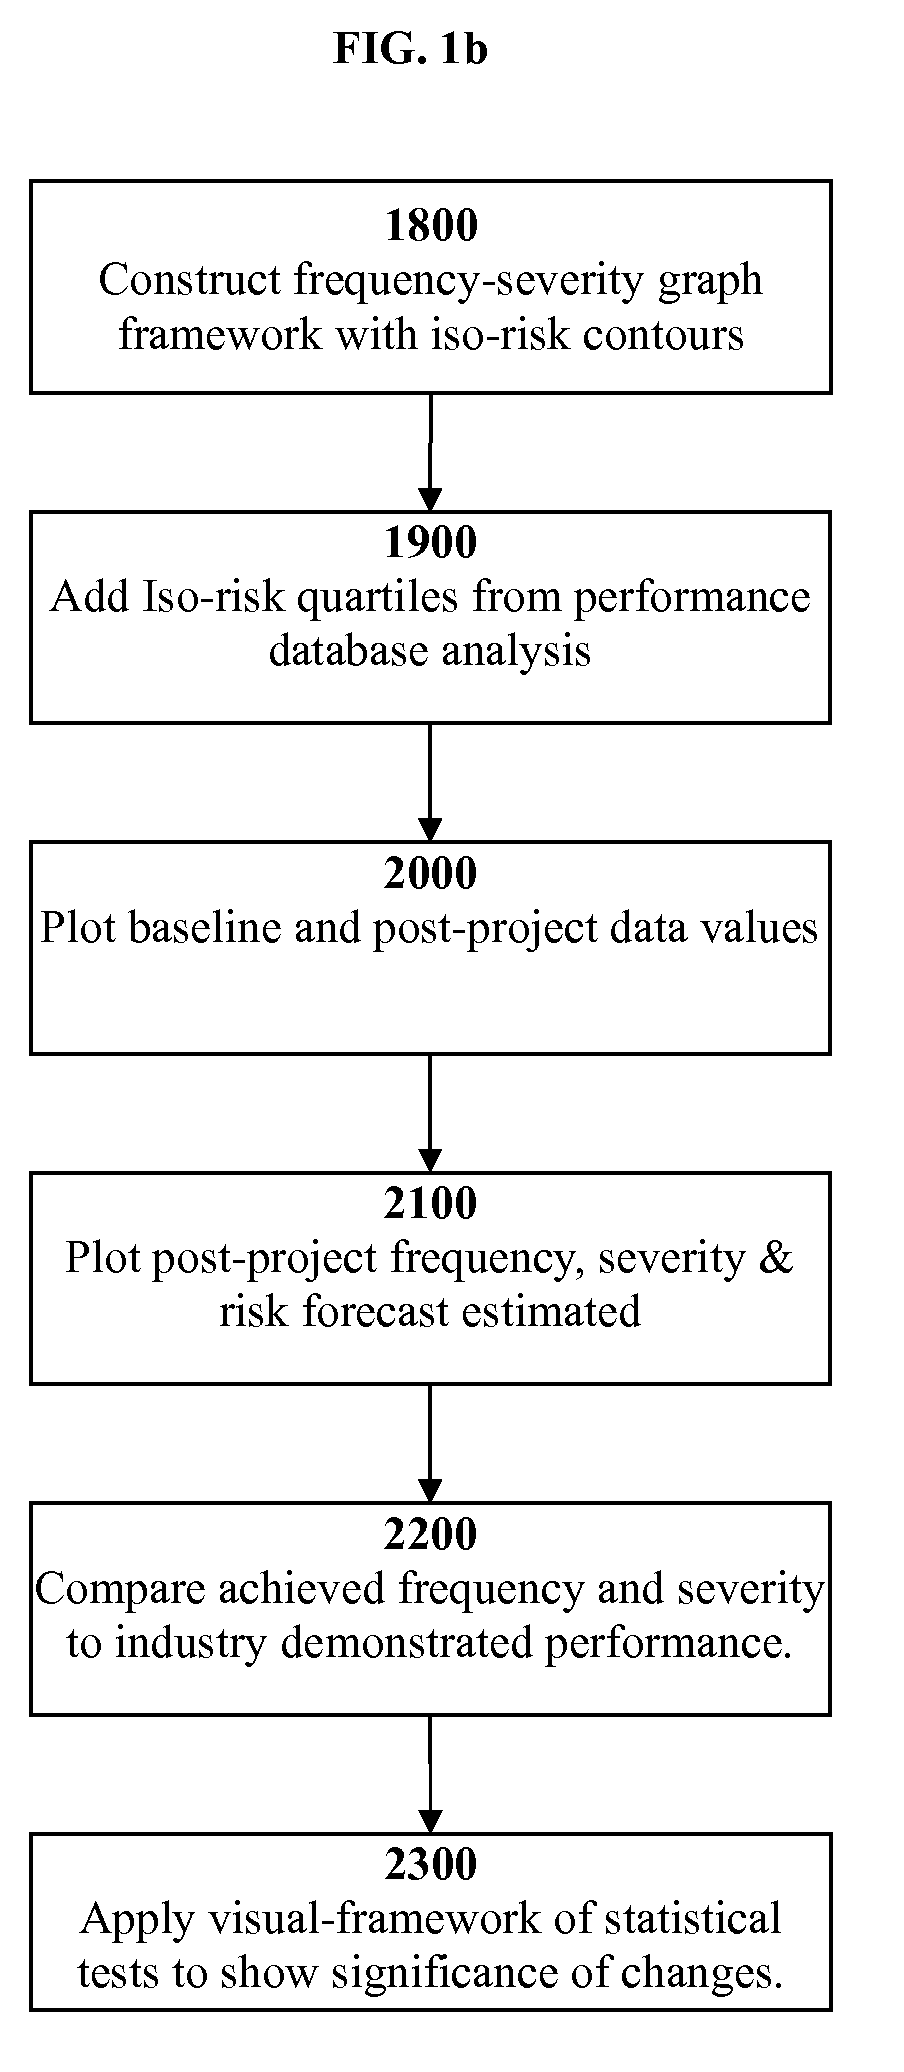 Graphical risk-based performance measurement and benchmarking system and method